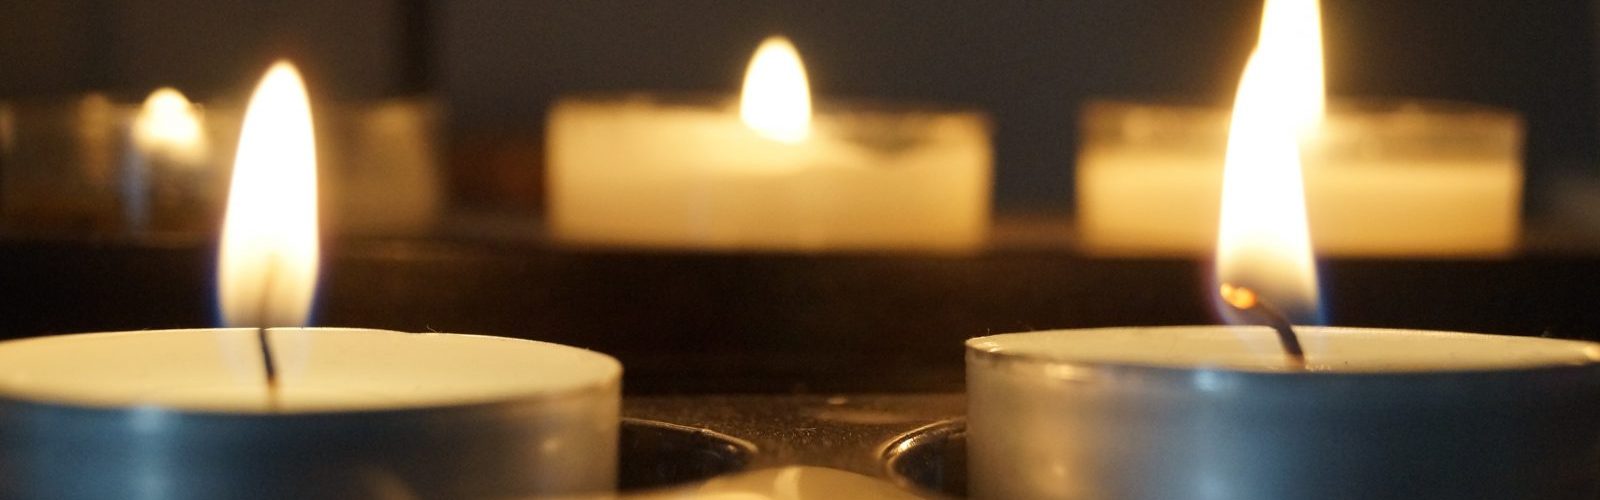 Picture of tea light candles in holders suggesting prayer candles.